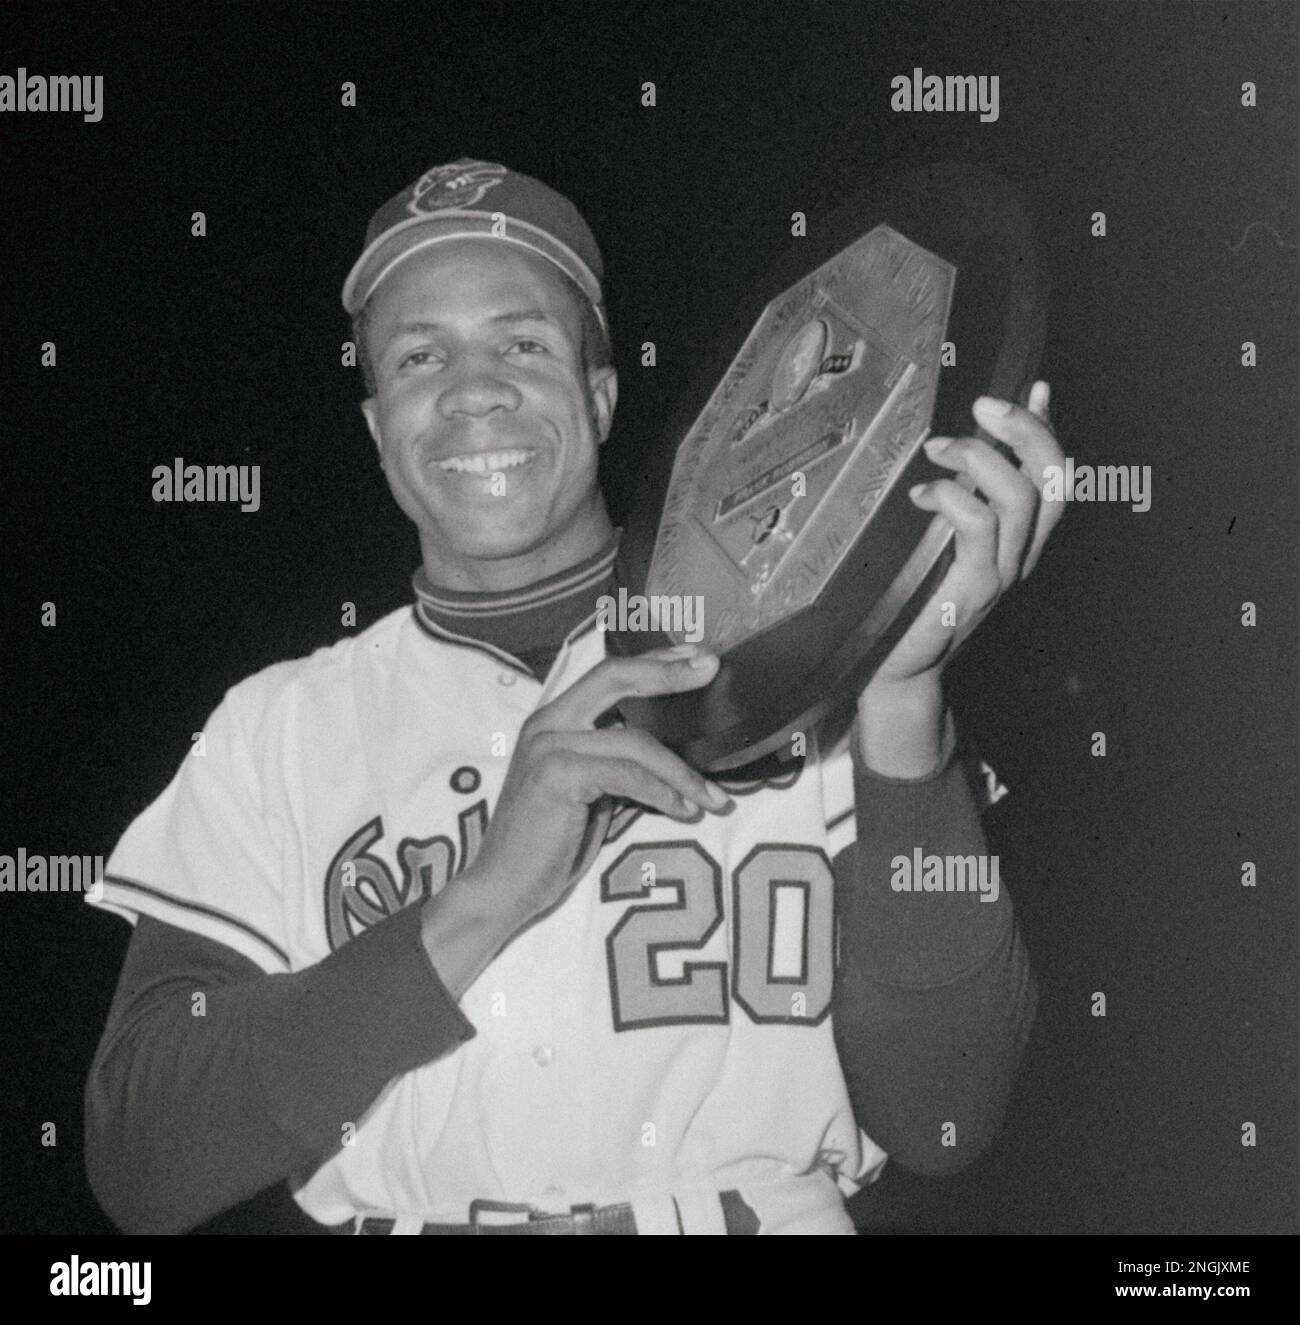 Baltimore Orioles outfielder Frank Robinson, the American League's Most  Valuable Player in 1966, was presented with a plaque symbolic of the award  in Baltimore, April 28, 1967. League President Joe Cronin presented